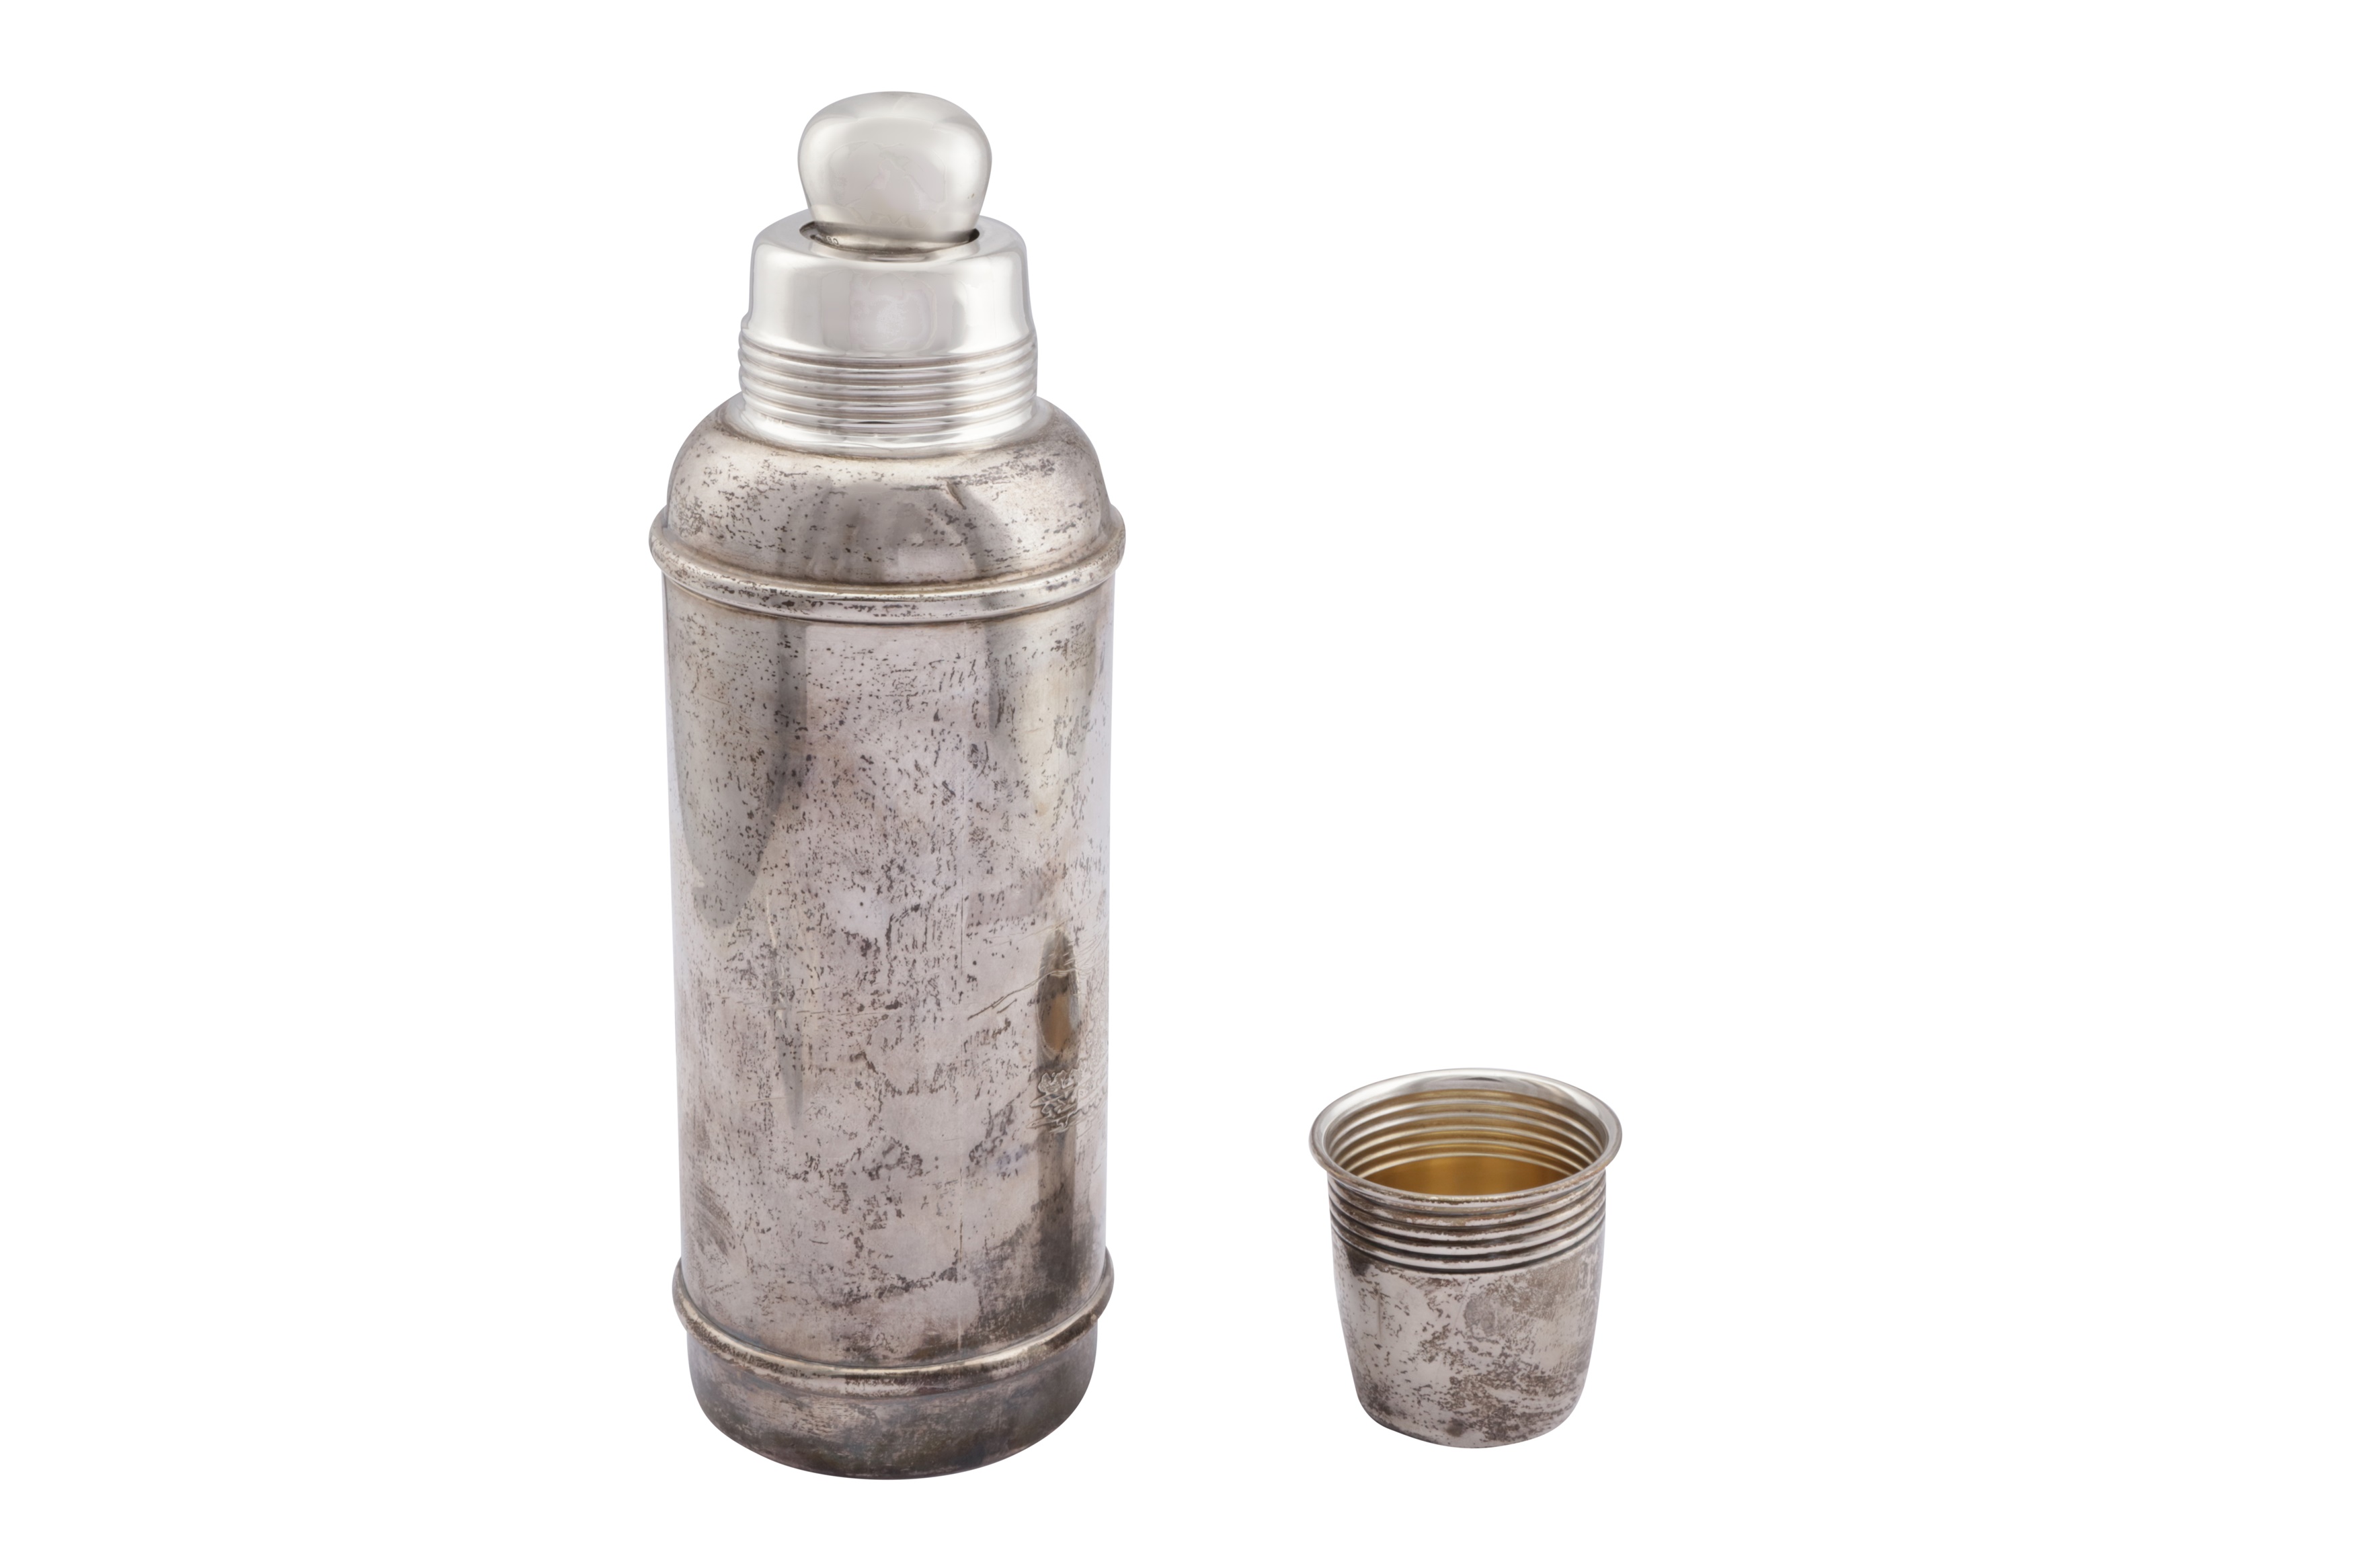 AN EARLY 20TH CENTURY AMERICAN STERLING SILVER AND GLASS LINED COCKTAIL SHAKER, NEW YORK CIRCA 1910  - Image 2 of 2